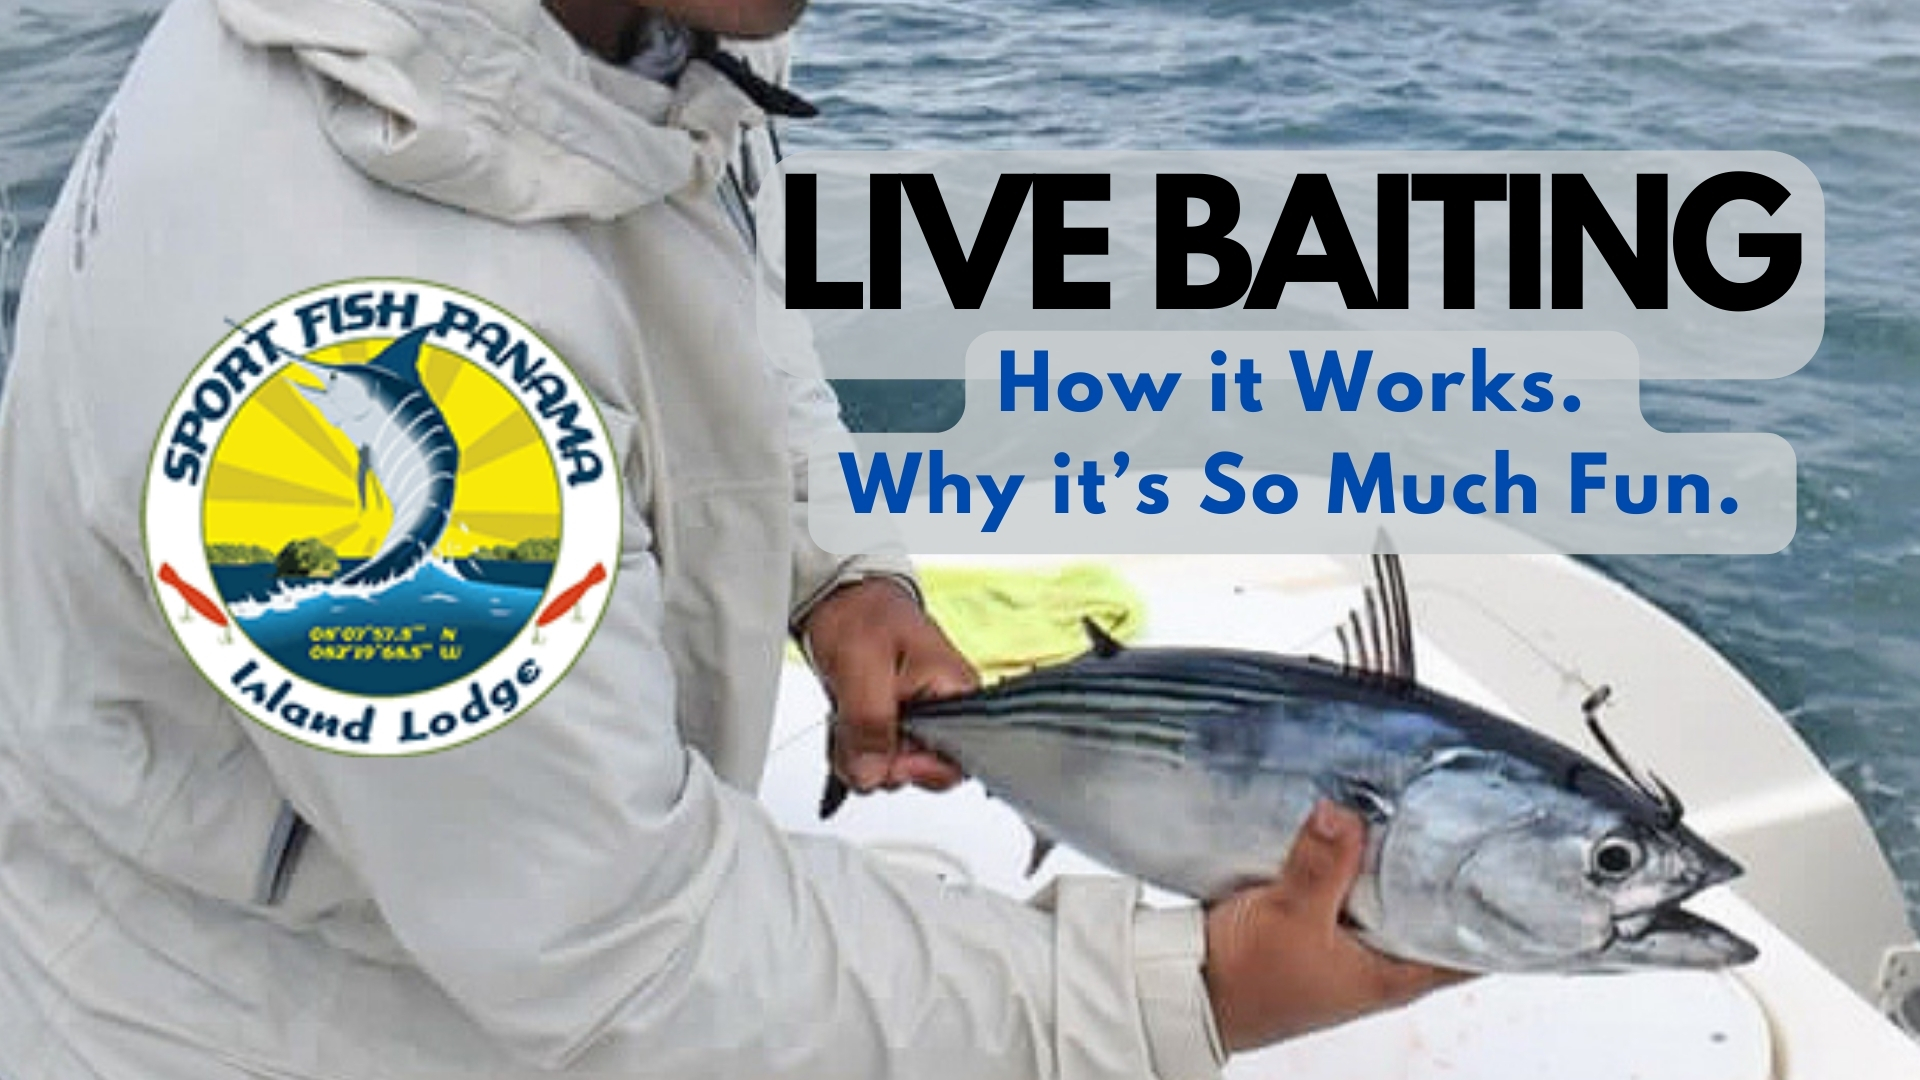 Live Baiting: How it Works, Why it’s So Much Fun